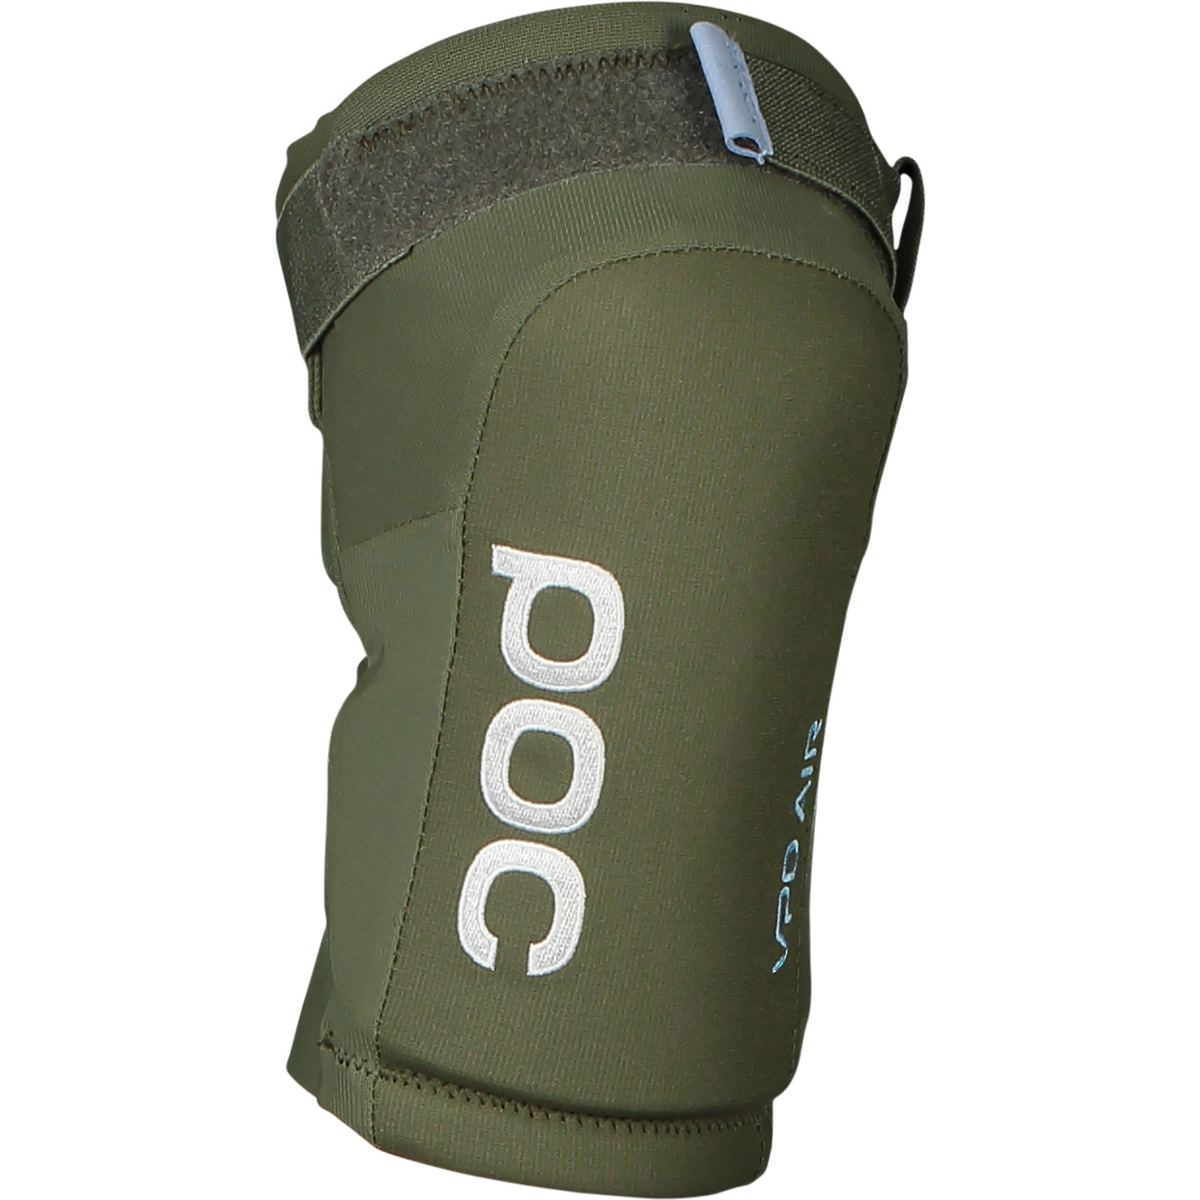 POC Sports Joint VPD Air Knee Protector